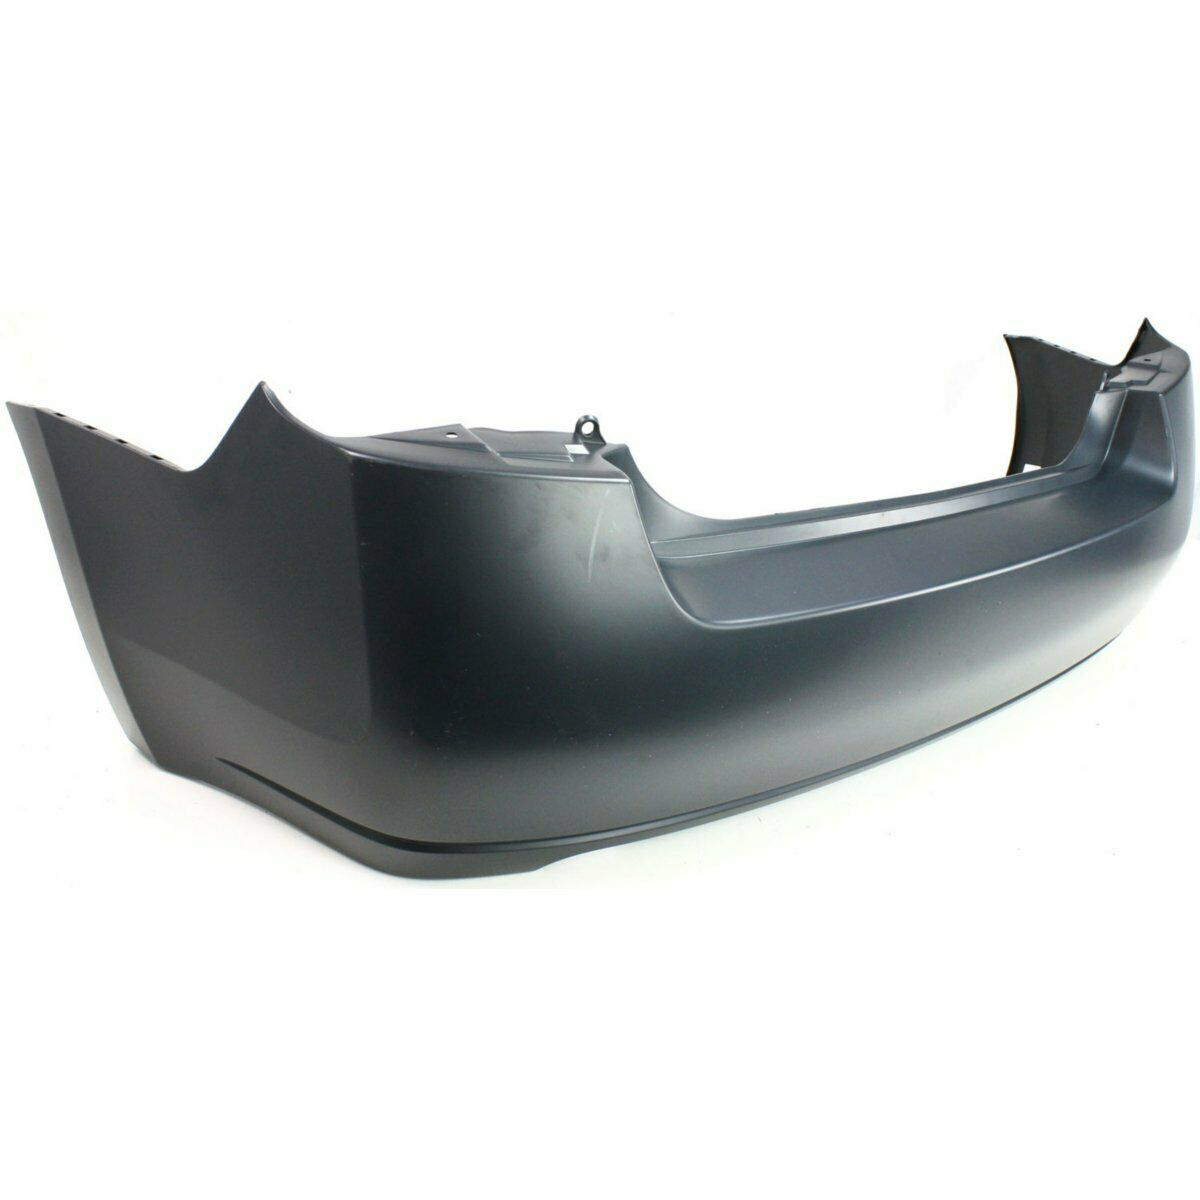 2007-2009 Nissan Sentra 2.0L Rear Bumper Painted to Match